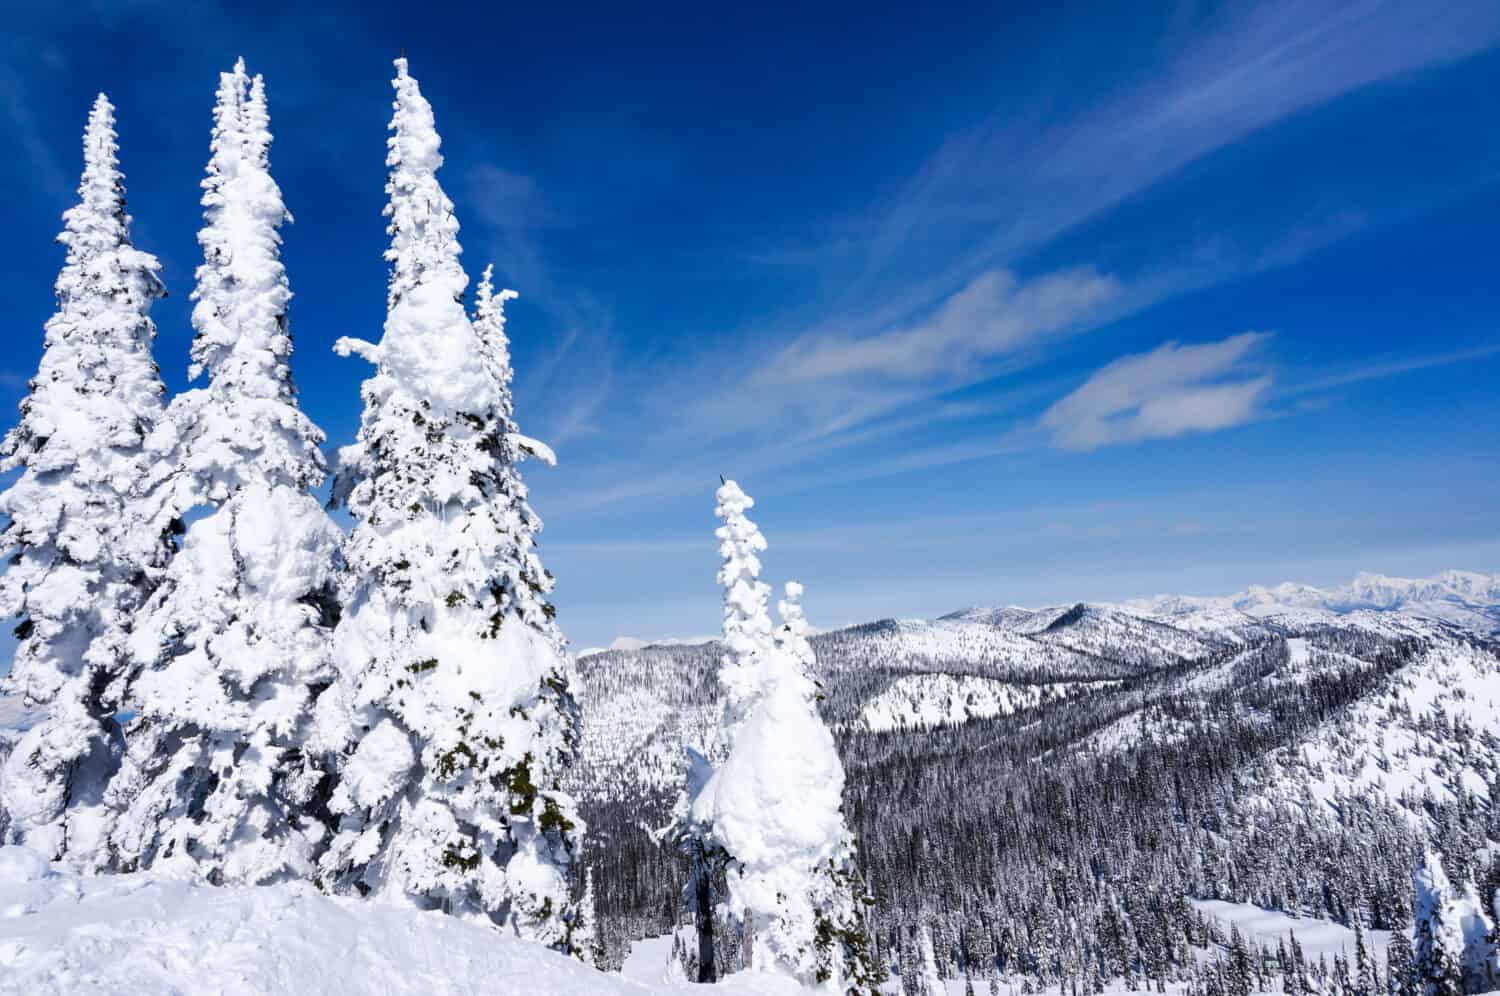 Winter landscape on Big Mountain in Whitefish, Montana, overlooking Glacier National Park, with copy space